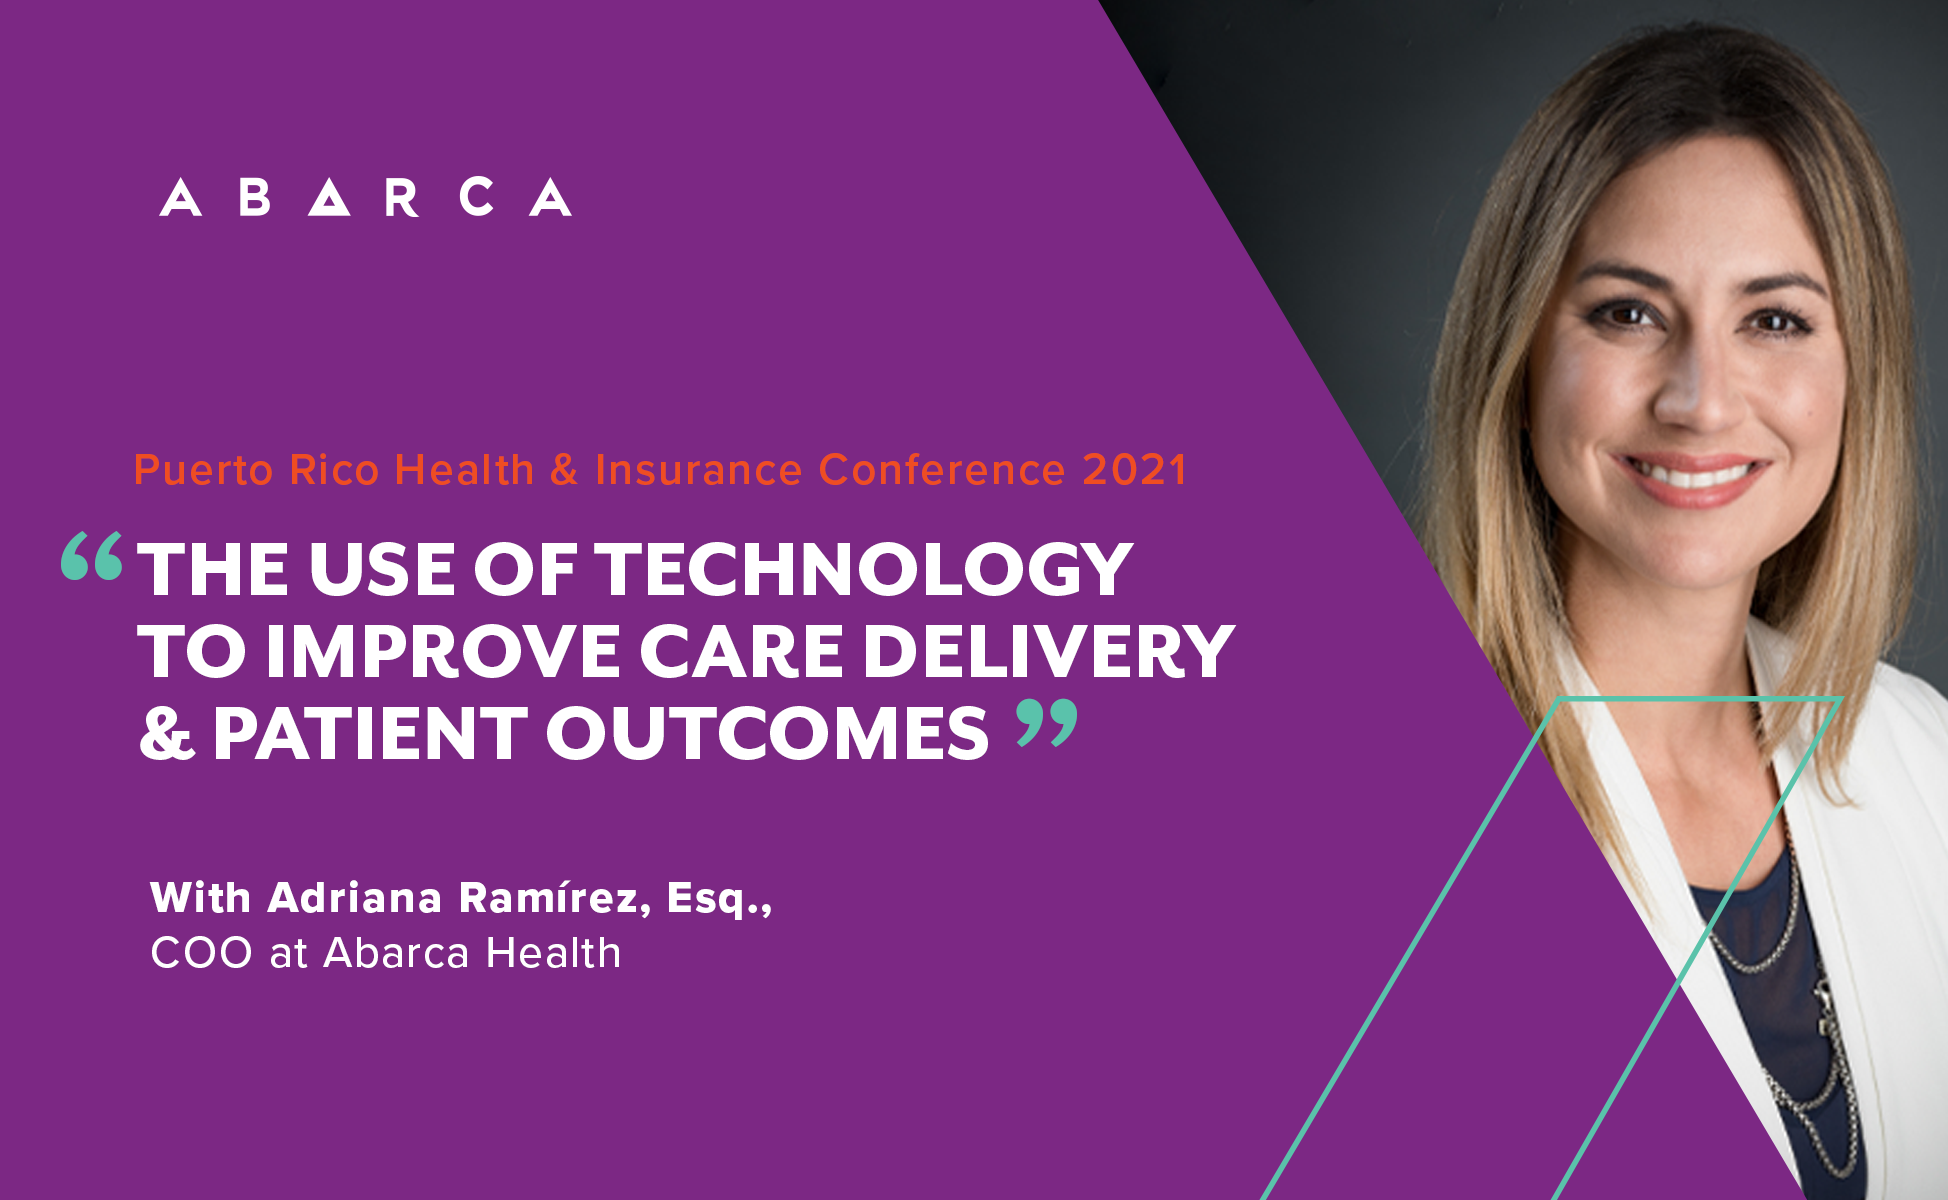 Abarca Health's Adriana Ramirez to lead panel on the role of technology in patient care